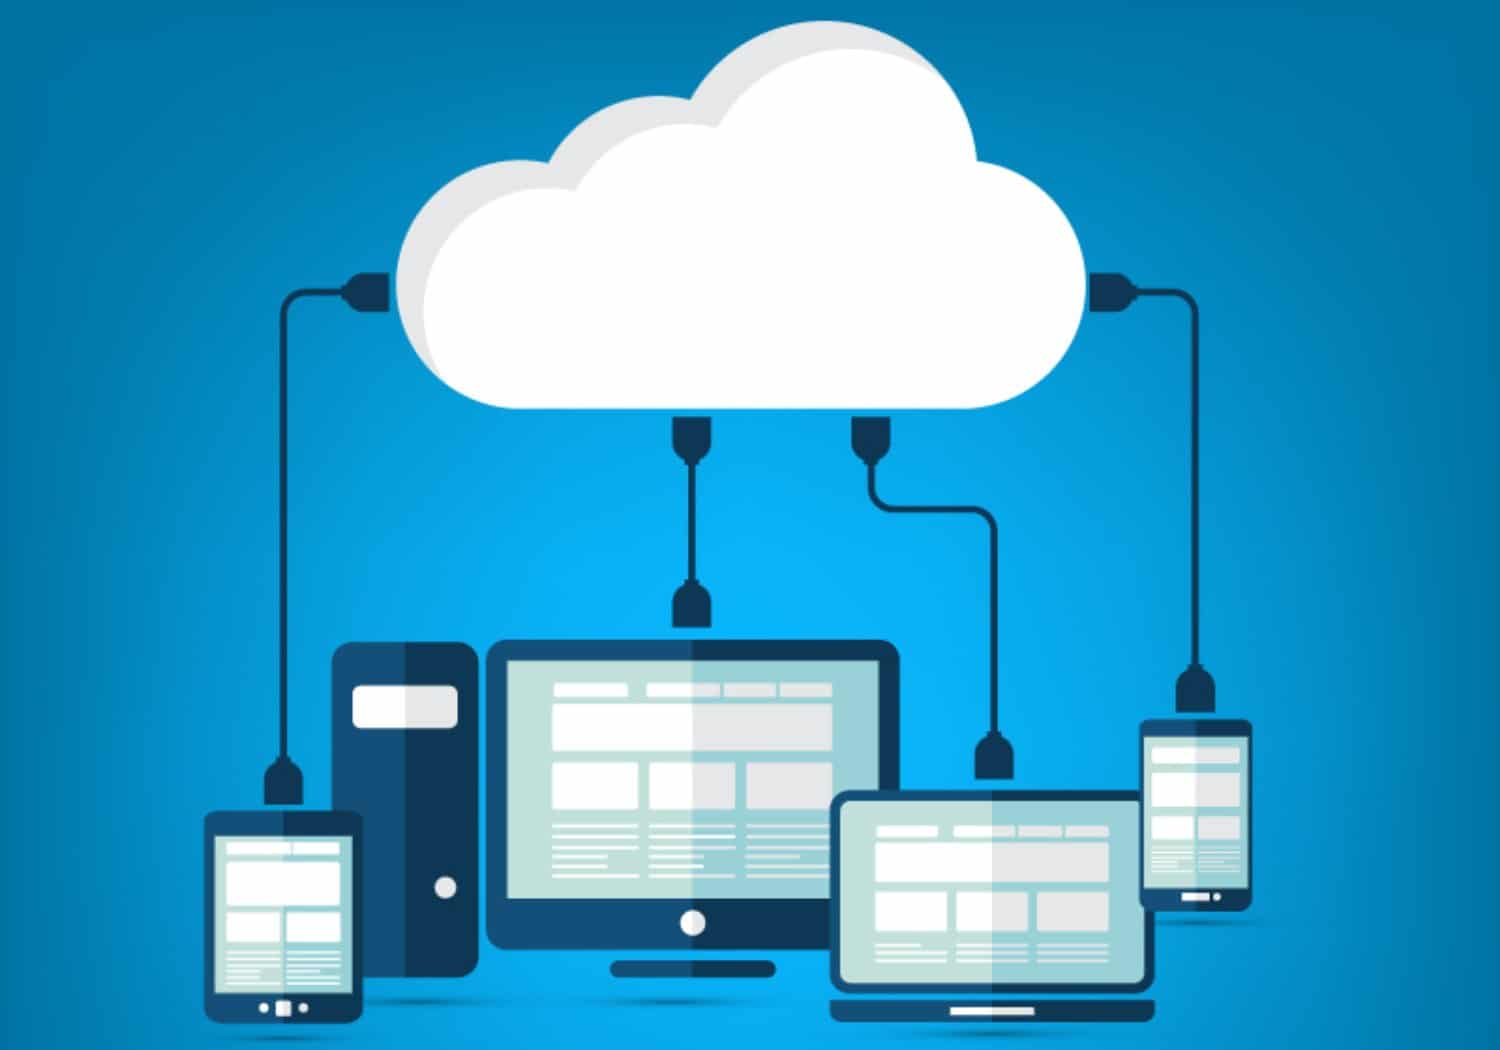 Virtualization Plays a Key Role in Cloud Computing